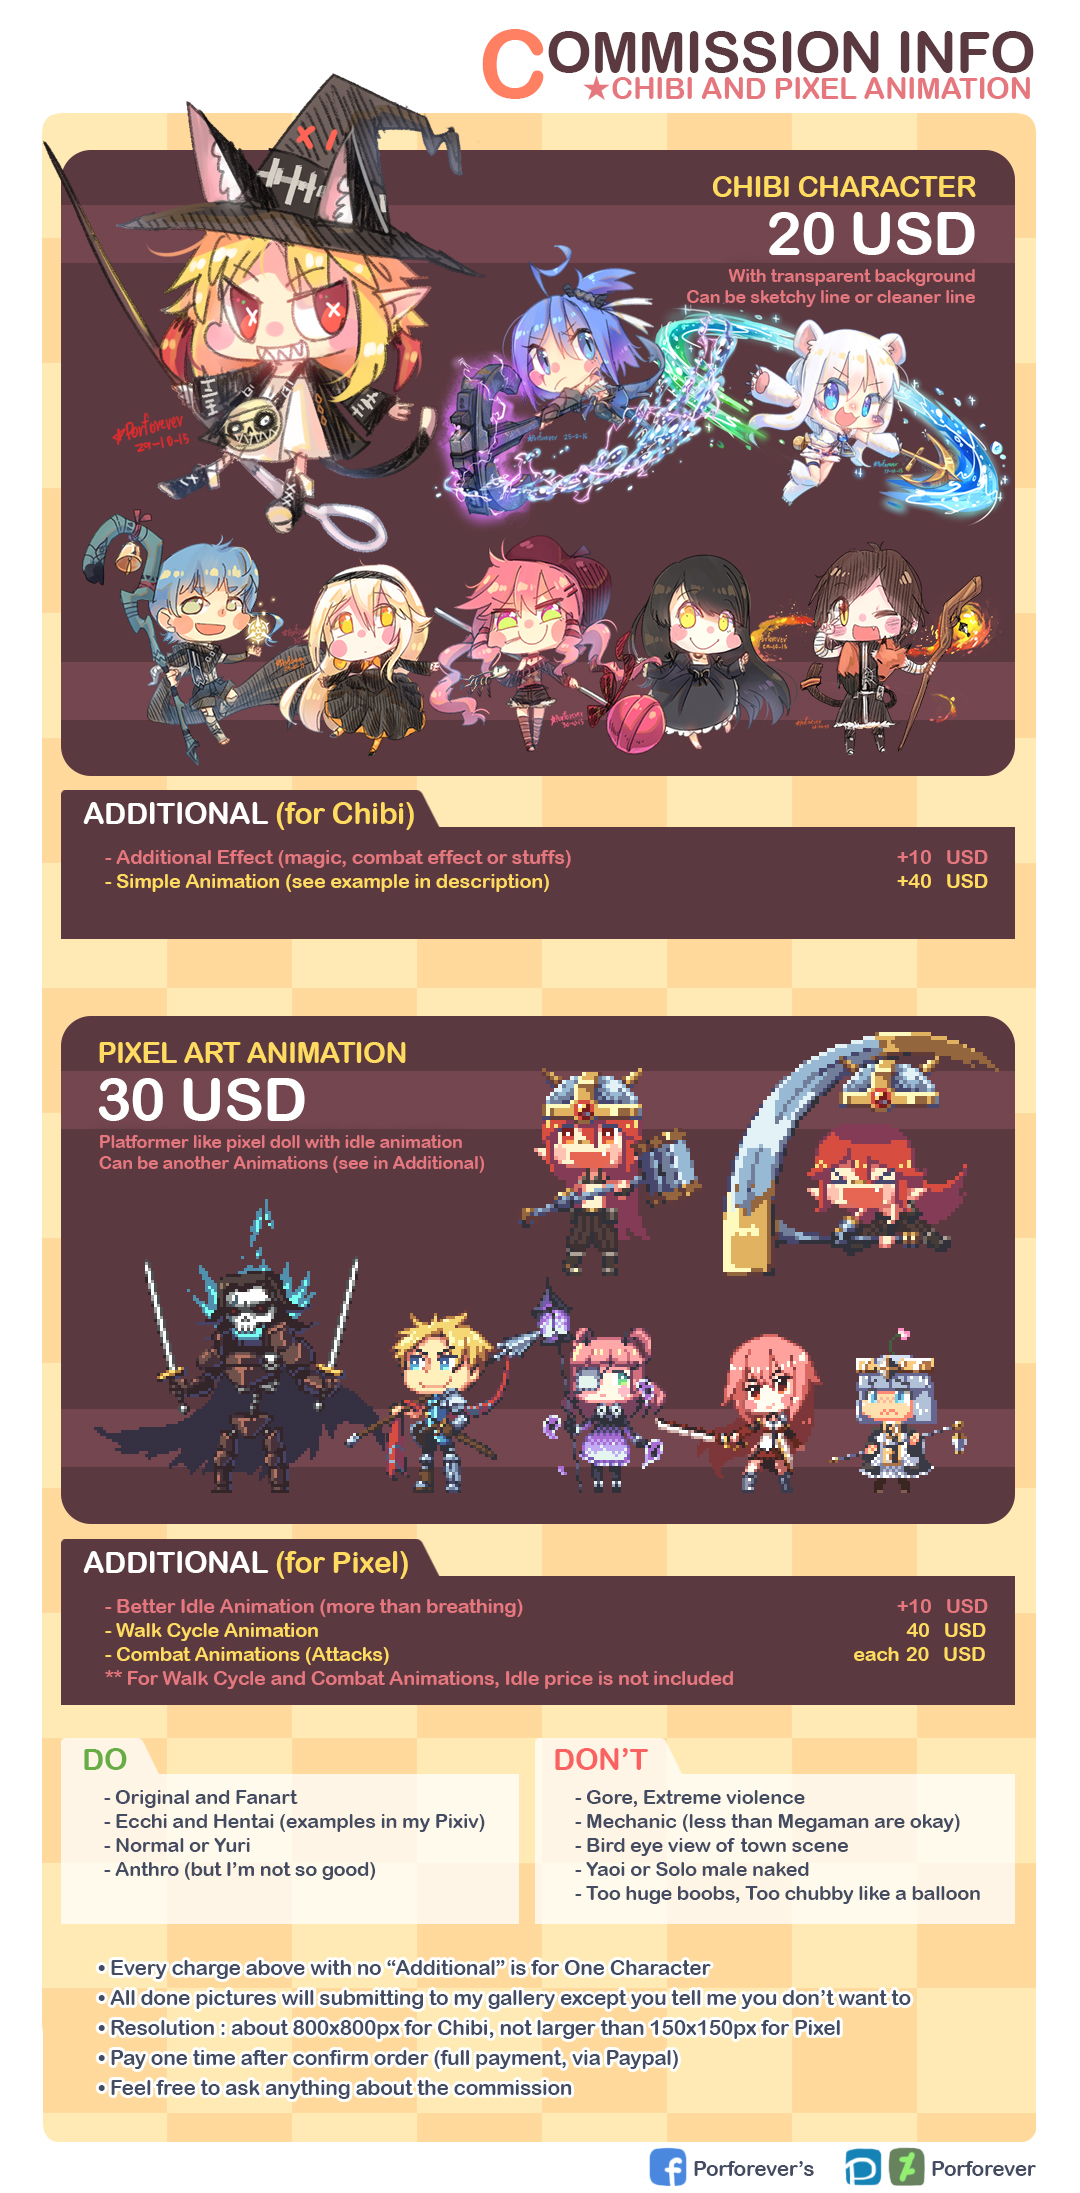 Commission Info - Chibi and Pixel Animation